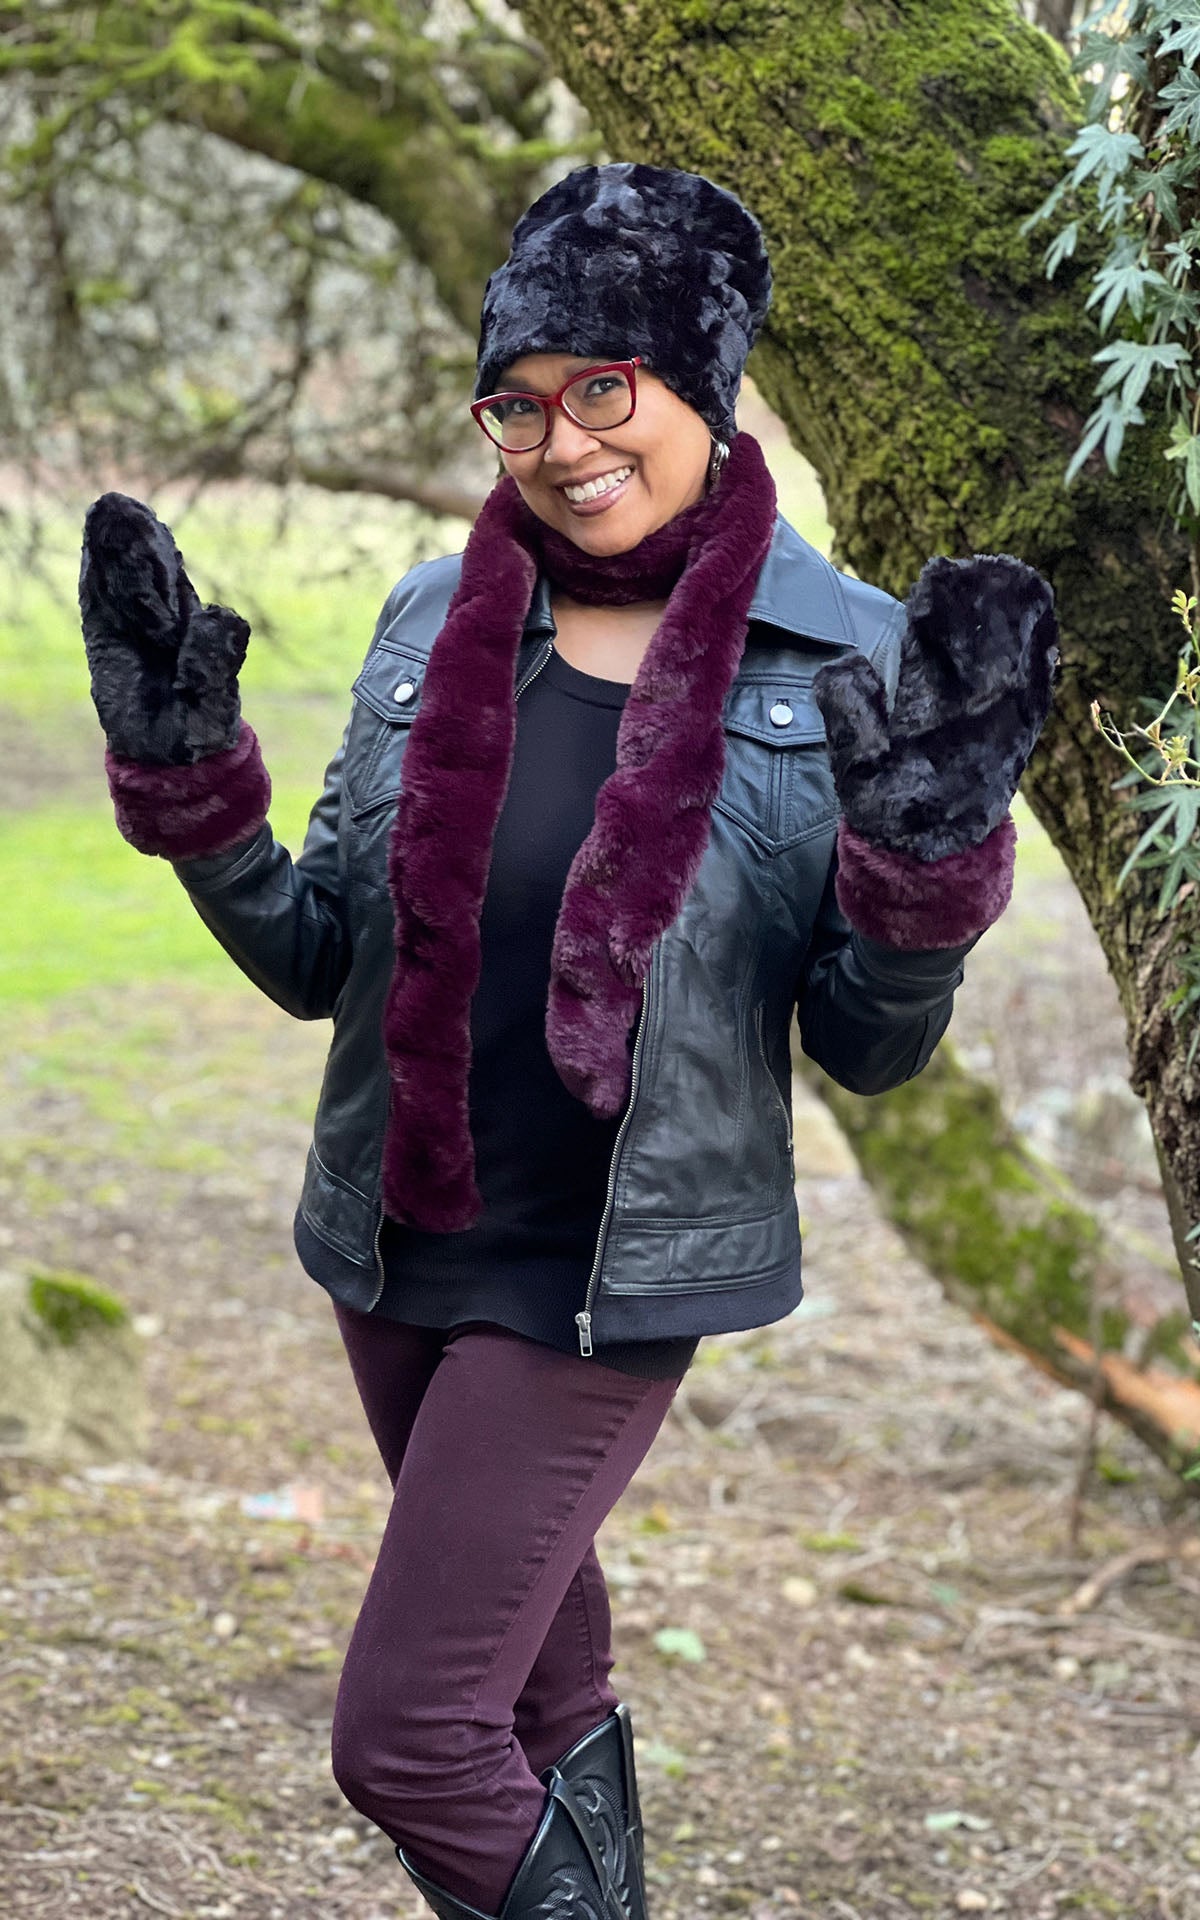 Woman wearing Royal Opulence Mittens with Merlot Cuffs and Cuddly Black, with matching Skinny Scarf in Merlot. Handmade by Pandemonium Seattle.